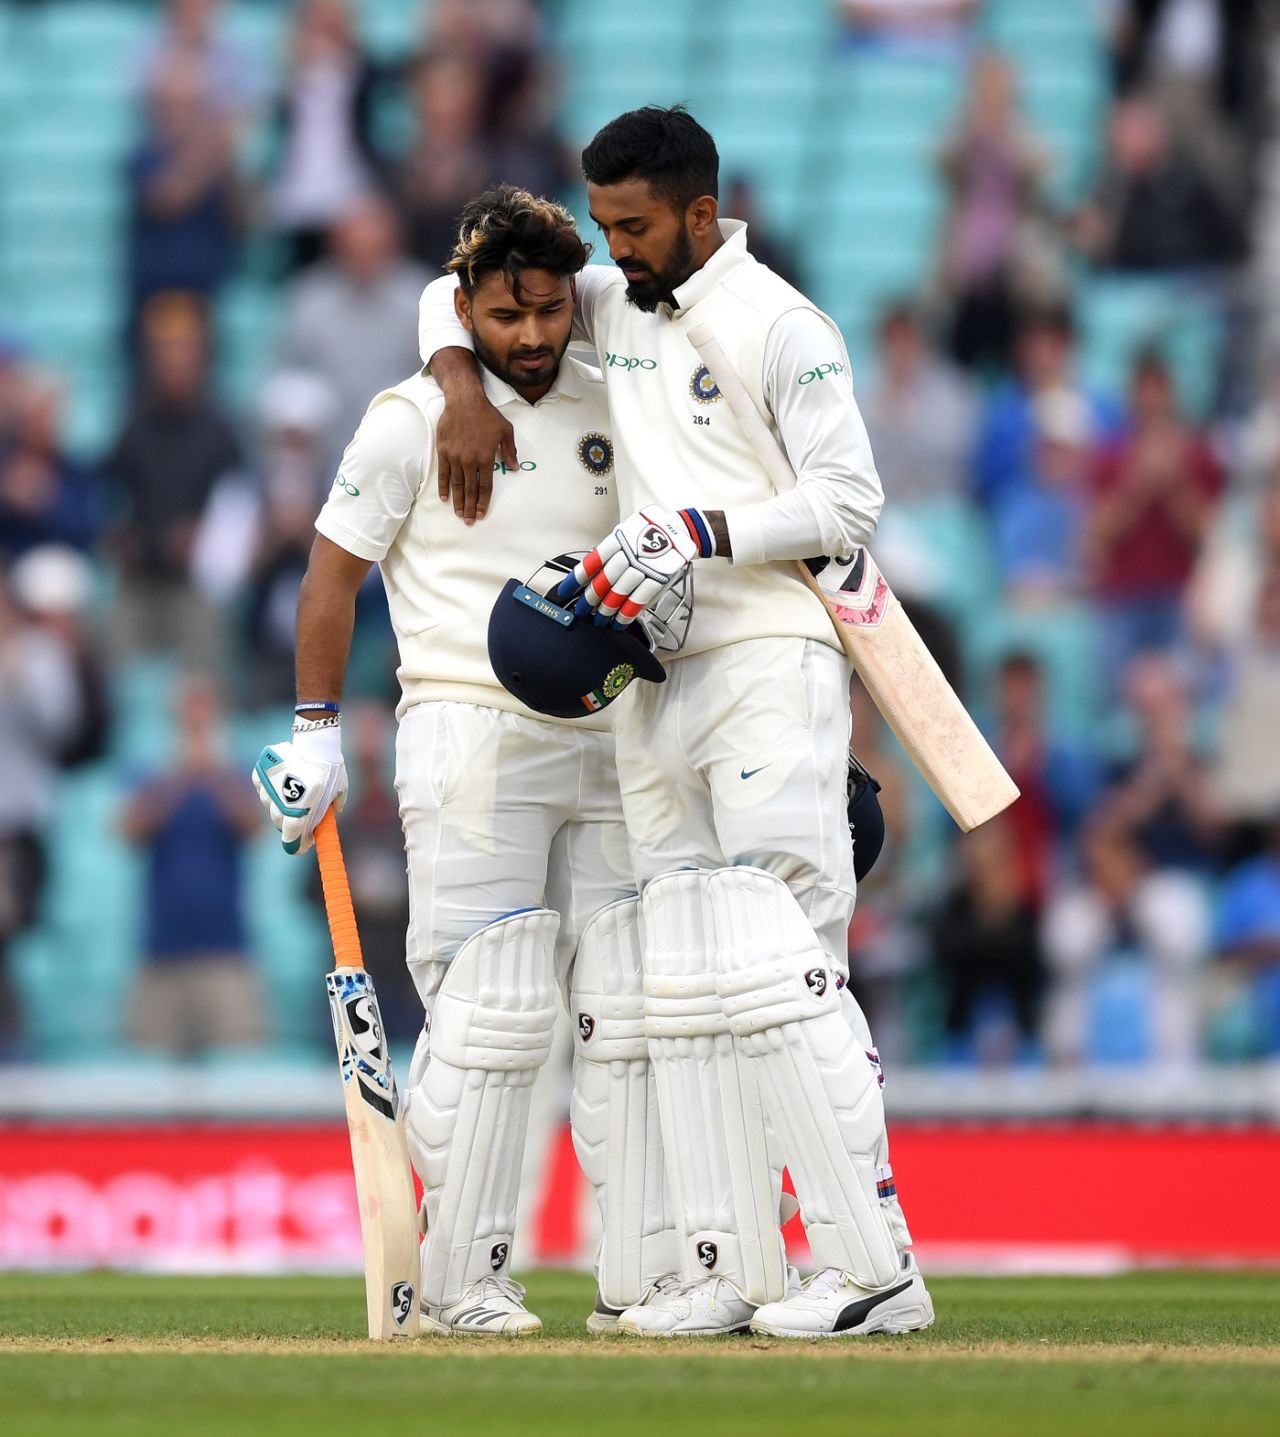 KL Rahul congratulates Rishabh Pant on his maiden Test hundred, England v India, 5th Test, The Oval, 5th day, September 11, 2018